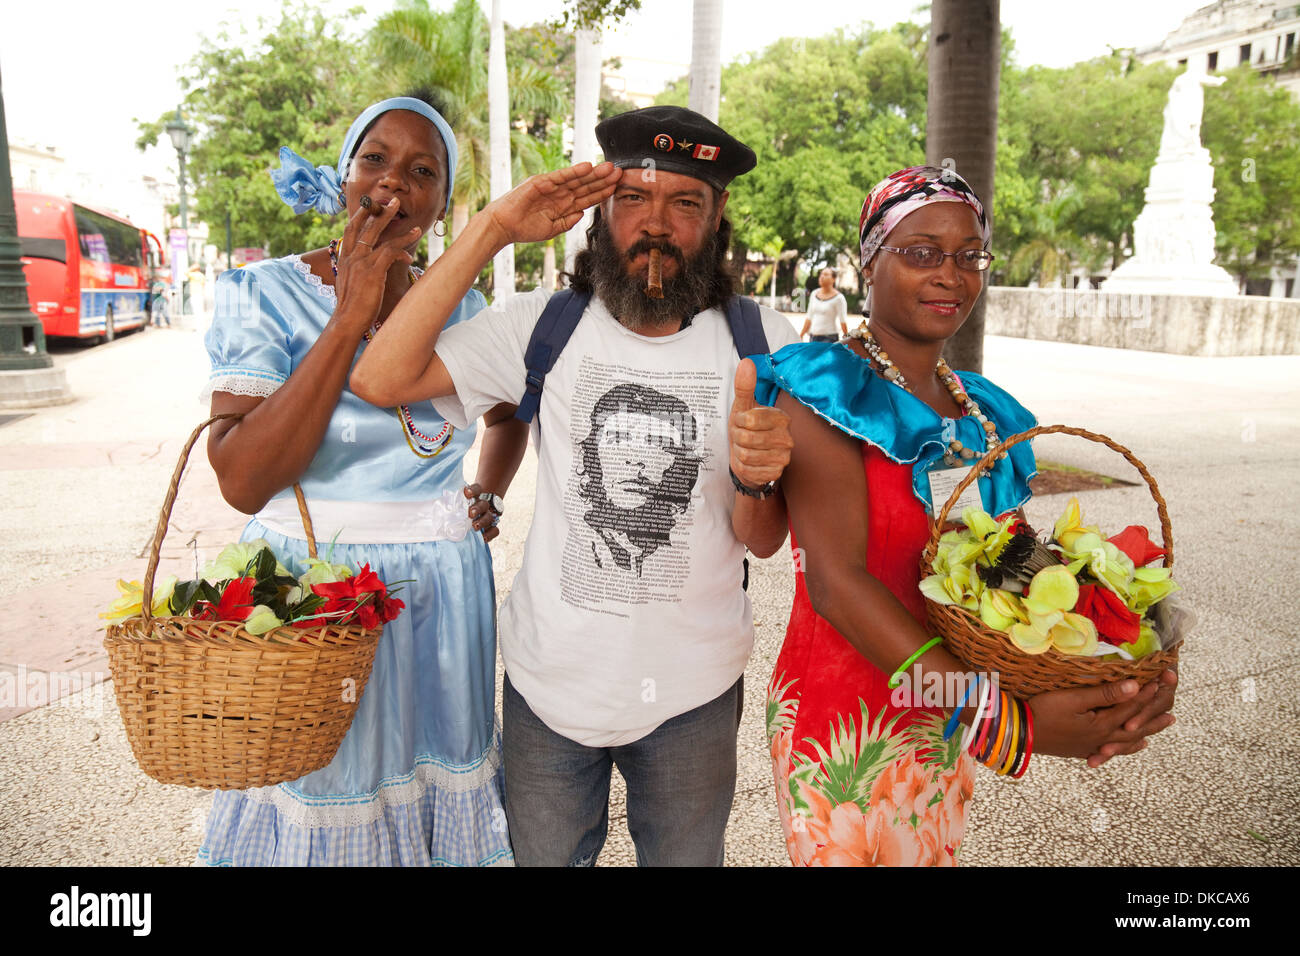 Local Cuban people dressed up and posing for tourists, Havana, Cuba, Caribbean Stock Photo